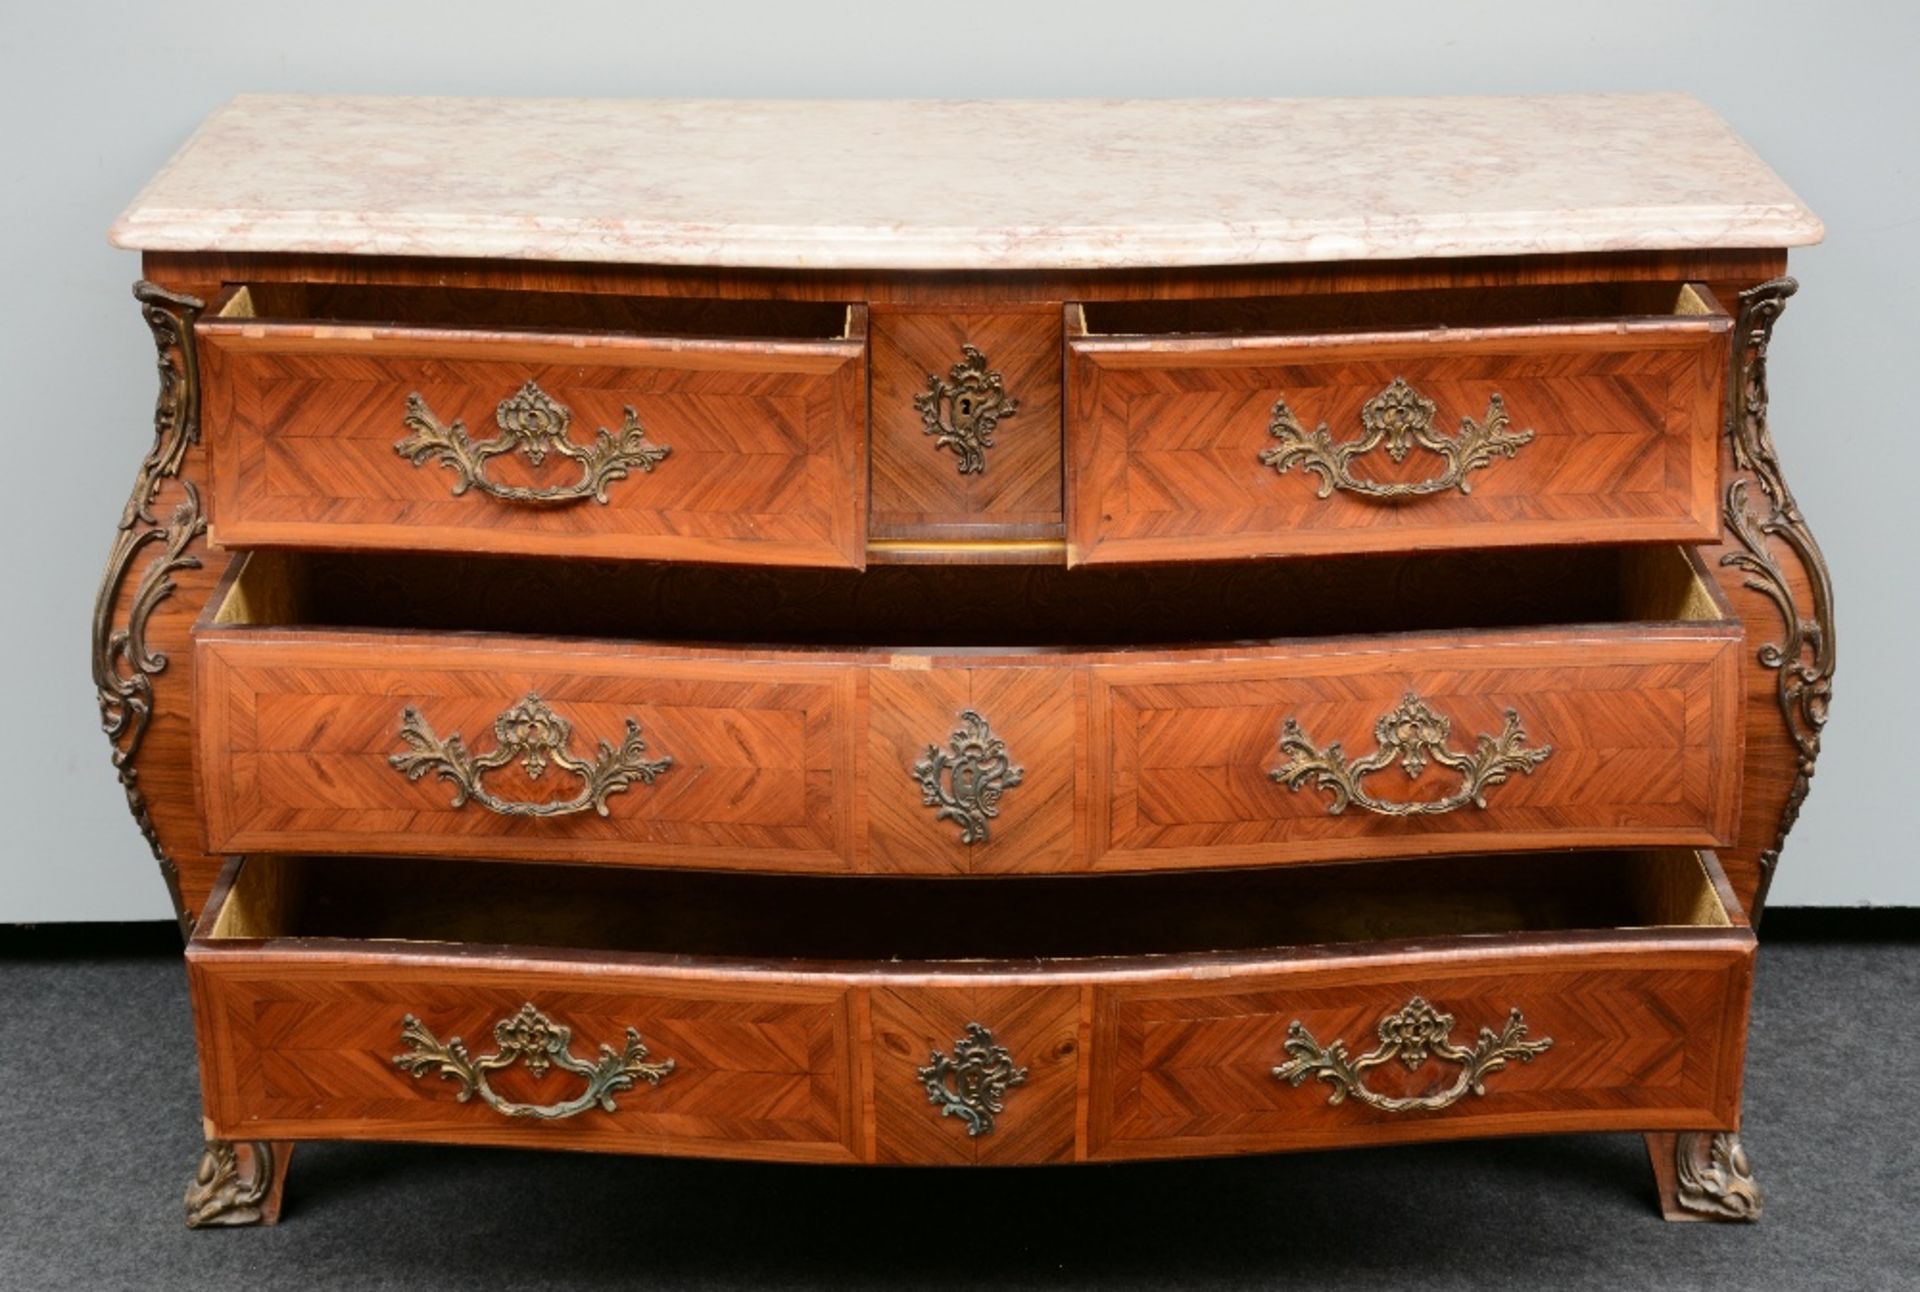 A Regency-style rosewood-marquetry commode with a marble top and fine bronze mounts, H 88 - W - Image 6 of 8